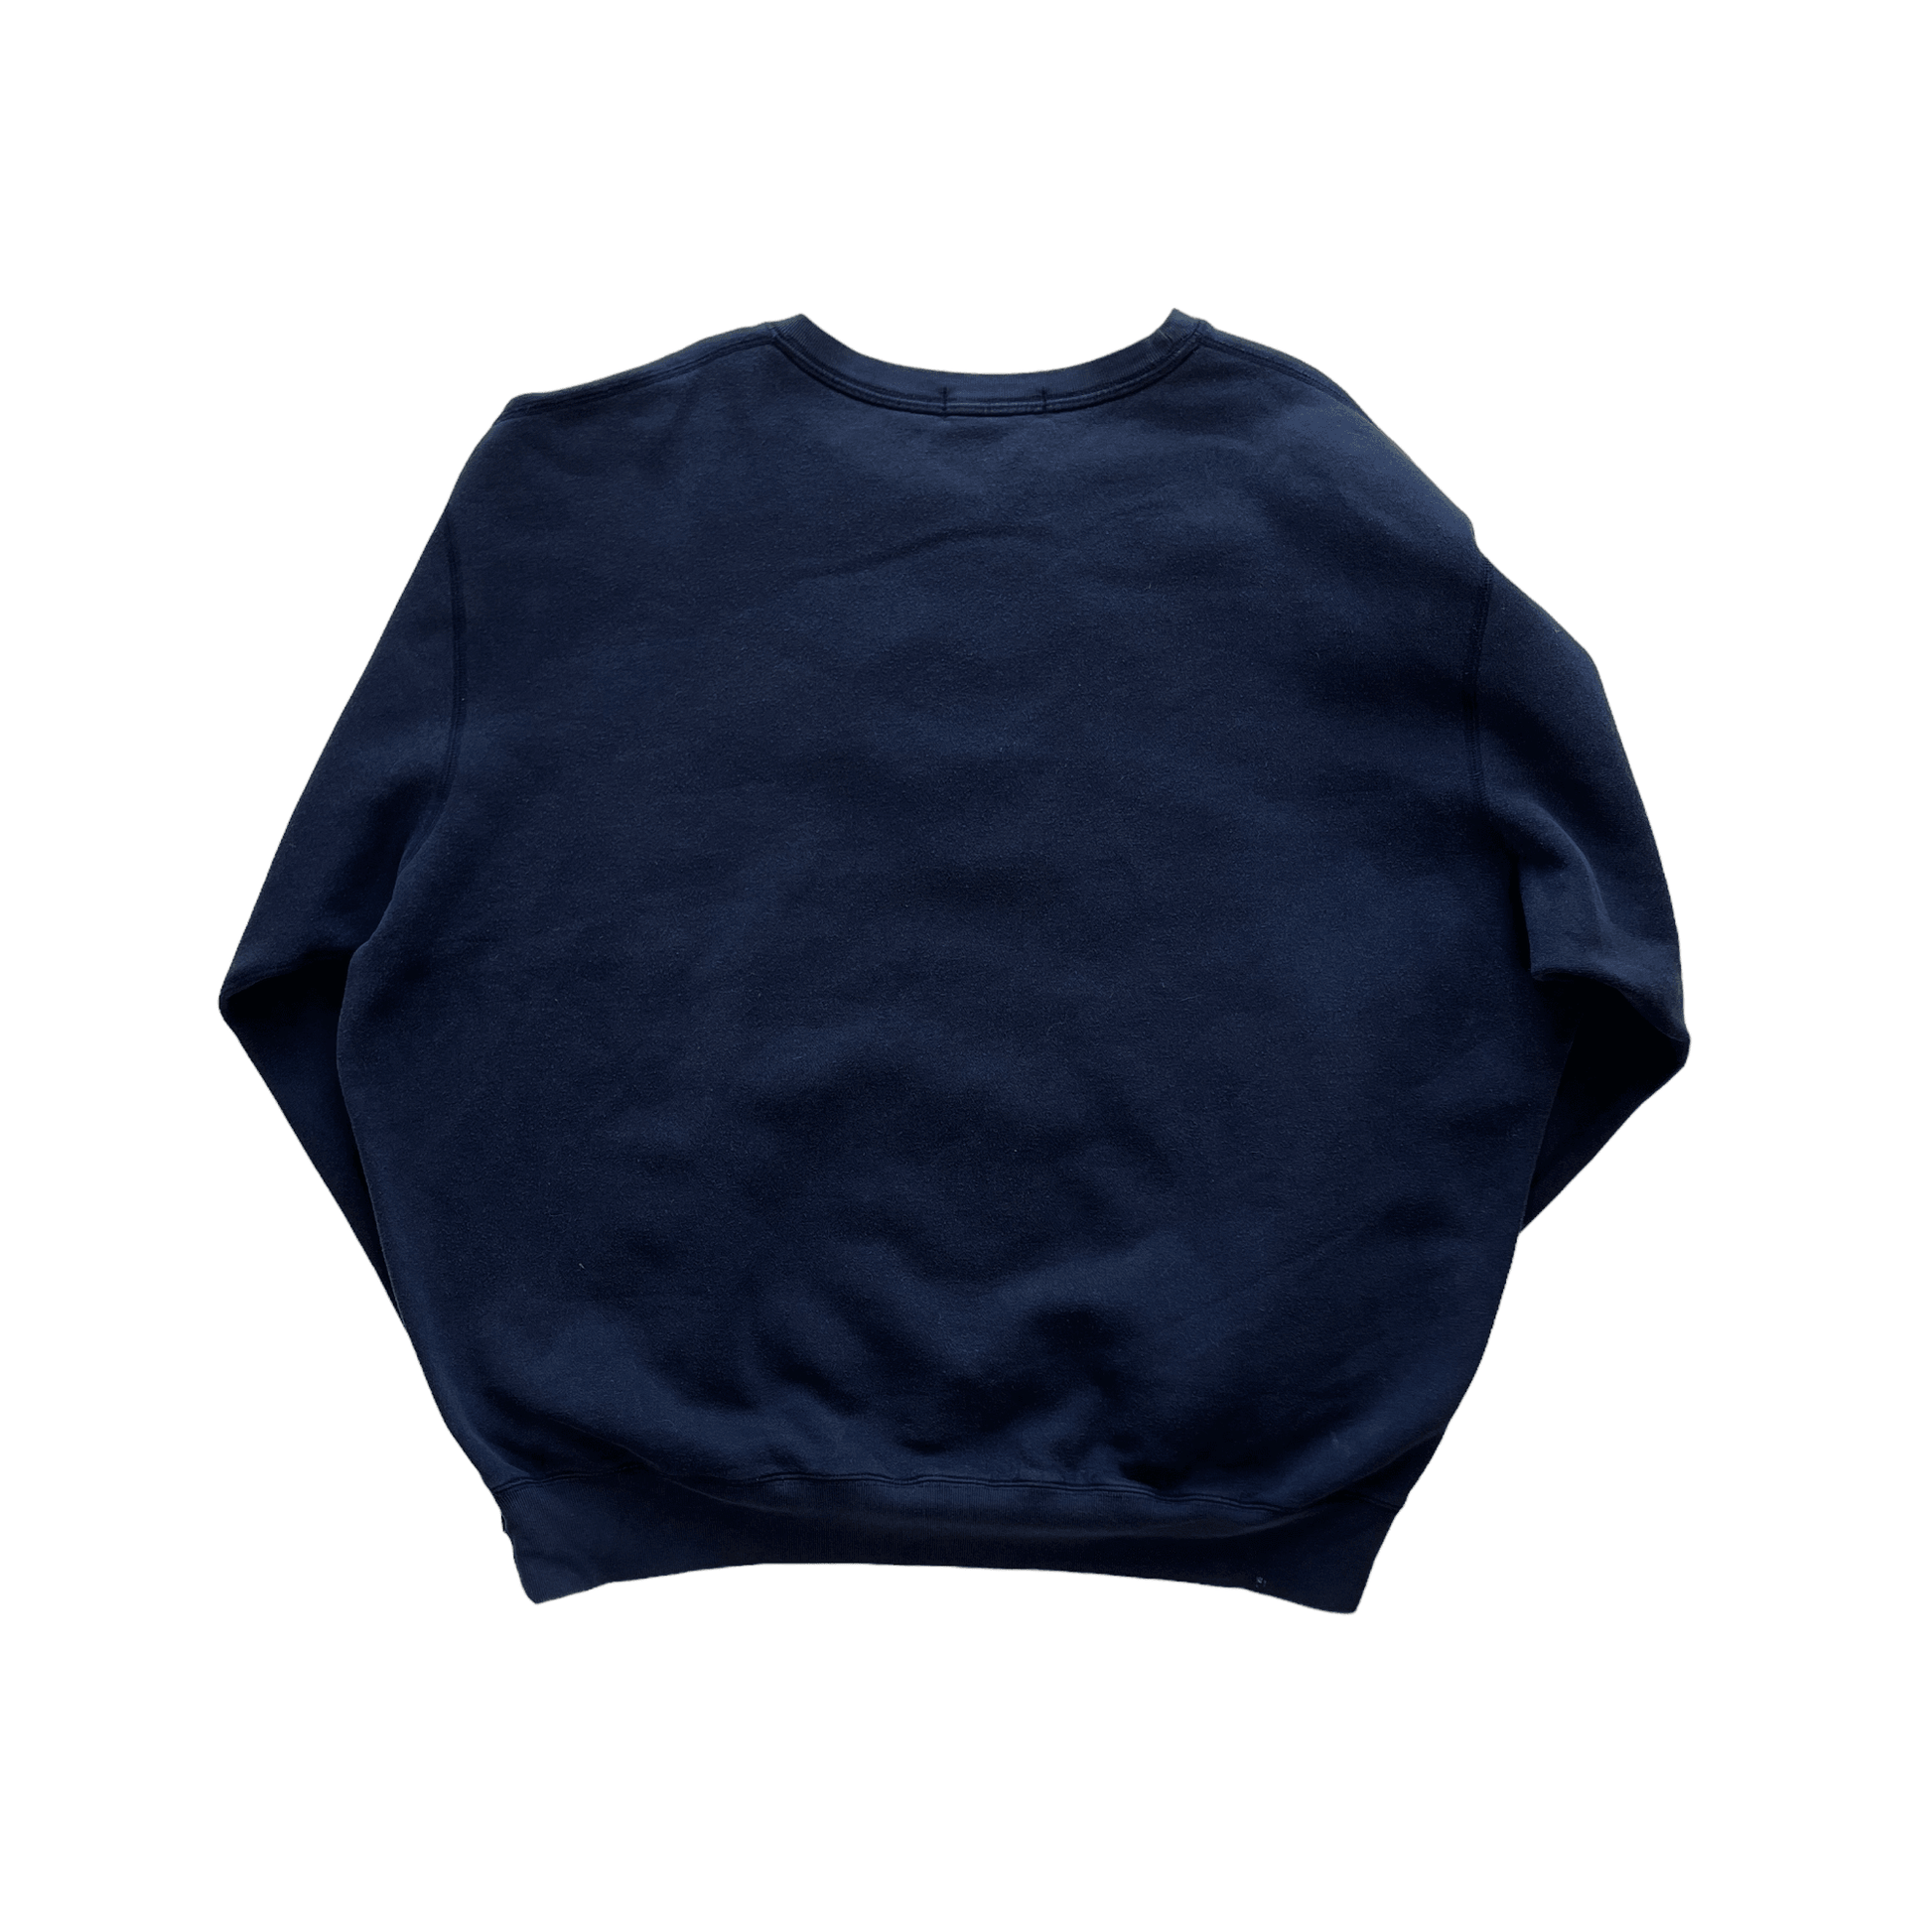 Vintage 90s Navy Blue Polo Ralph Lauren Spell-Out Sweatshirt - Extra Large - The Streetwear Studio